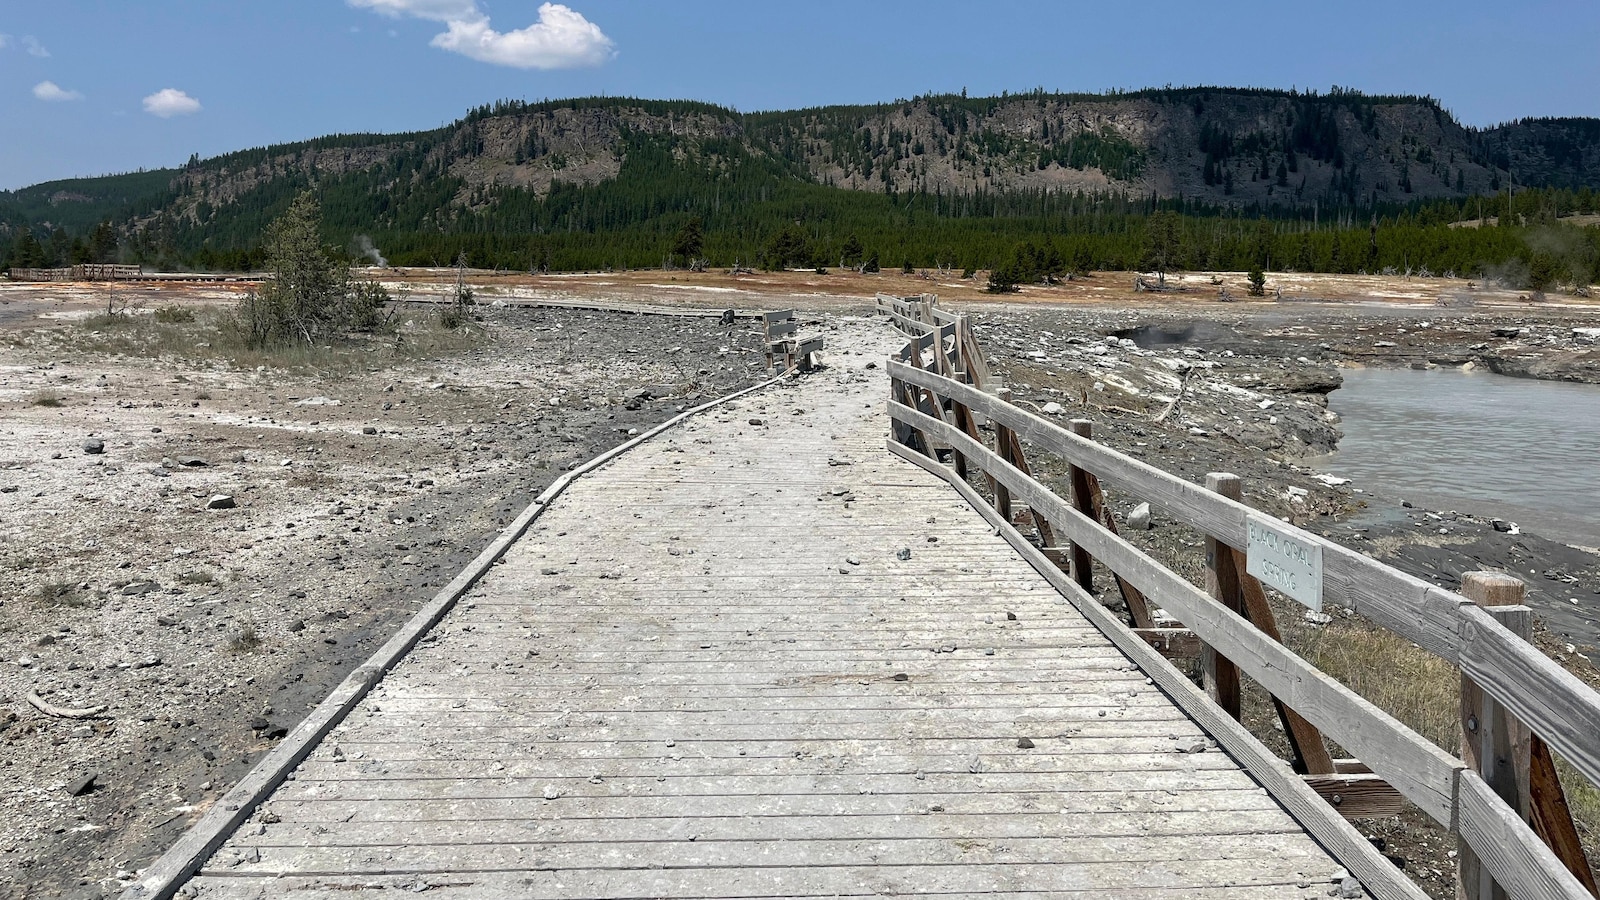 Unexpected Eruption at Yellowstone National Park Prompts Evacuation of Visitors